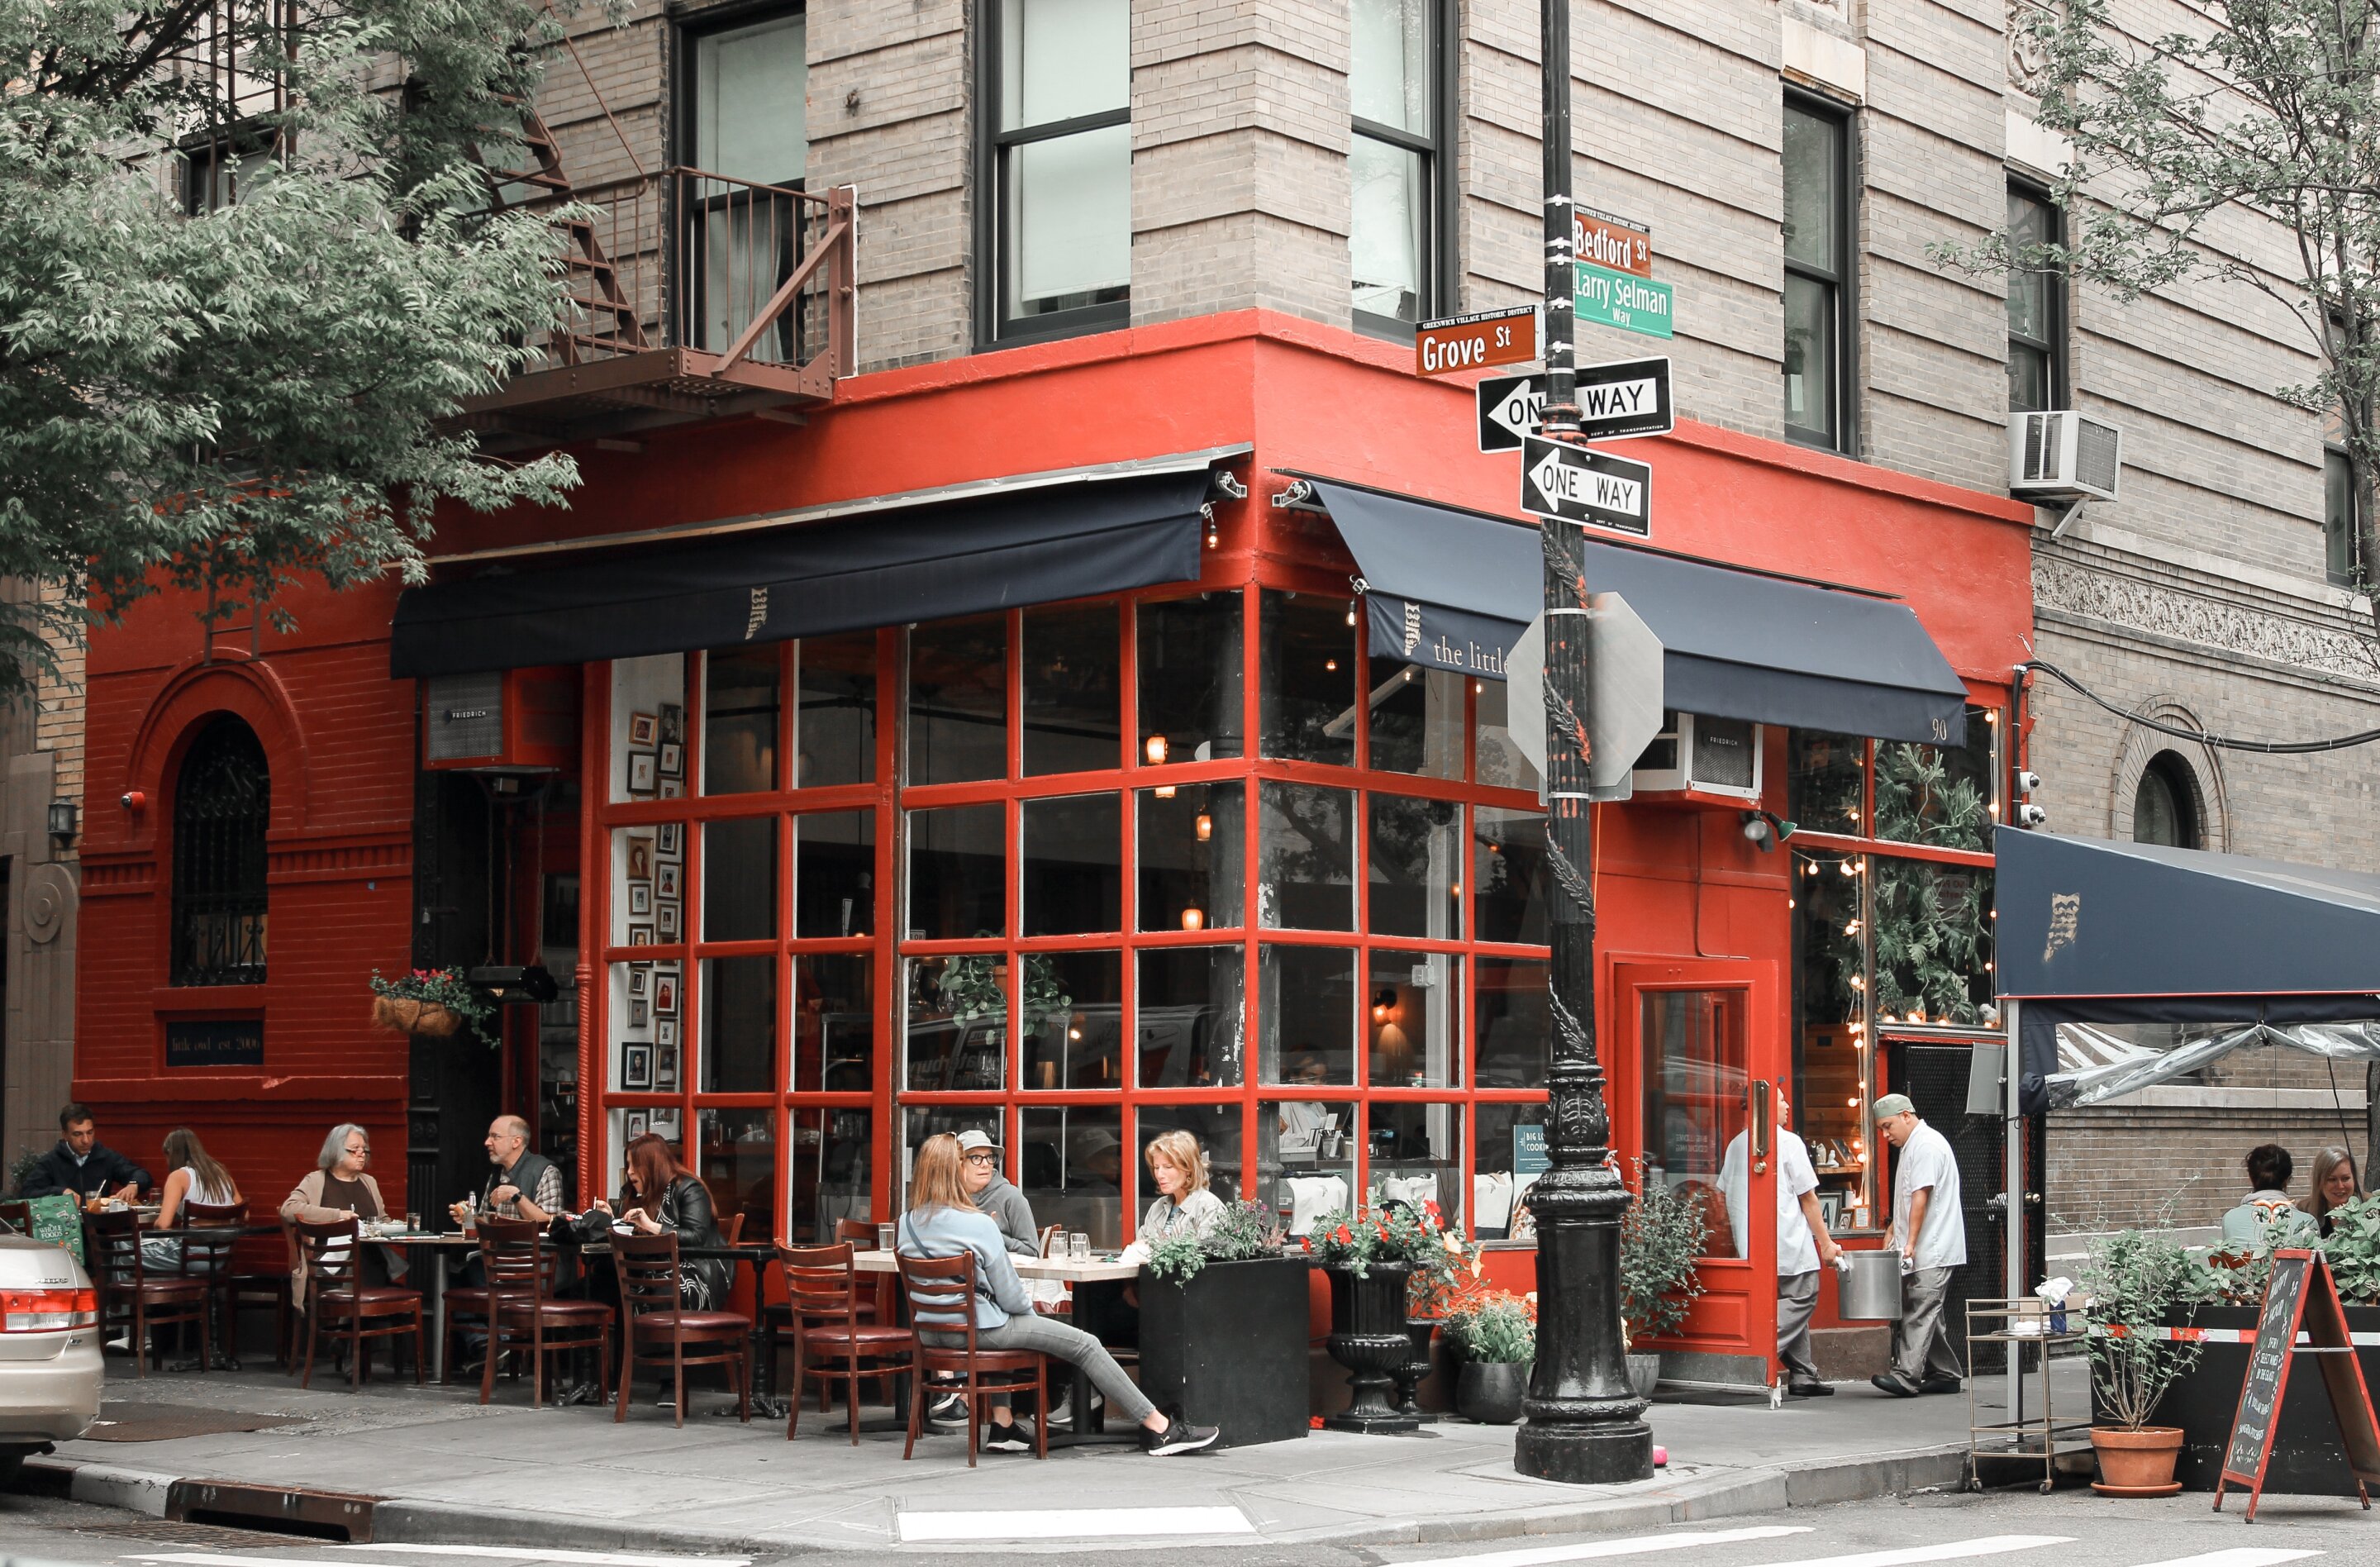 Rating platforms drive sales at tourist-area NYC eateries